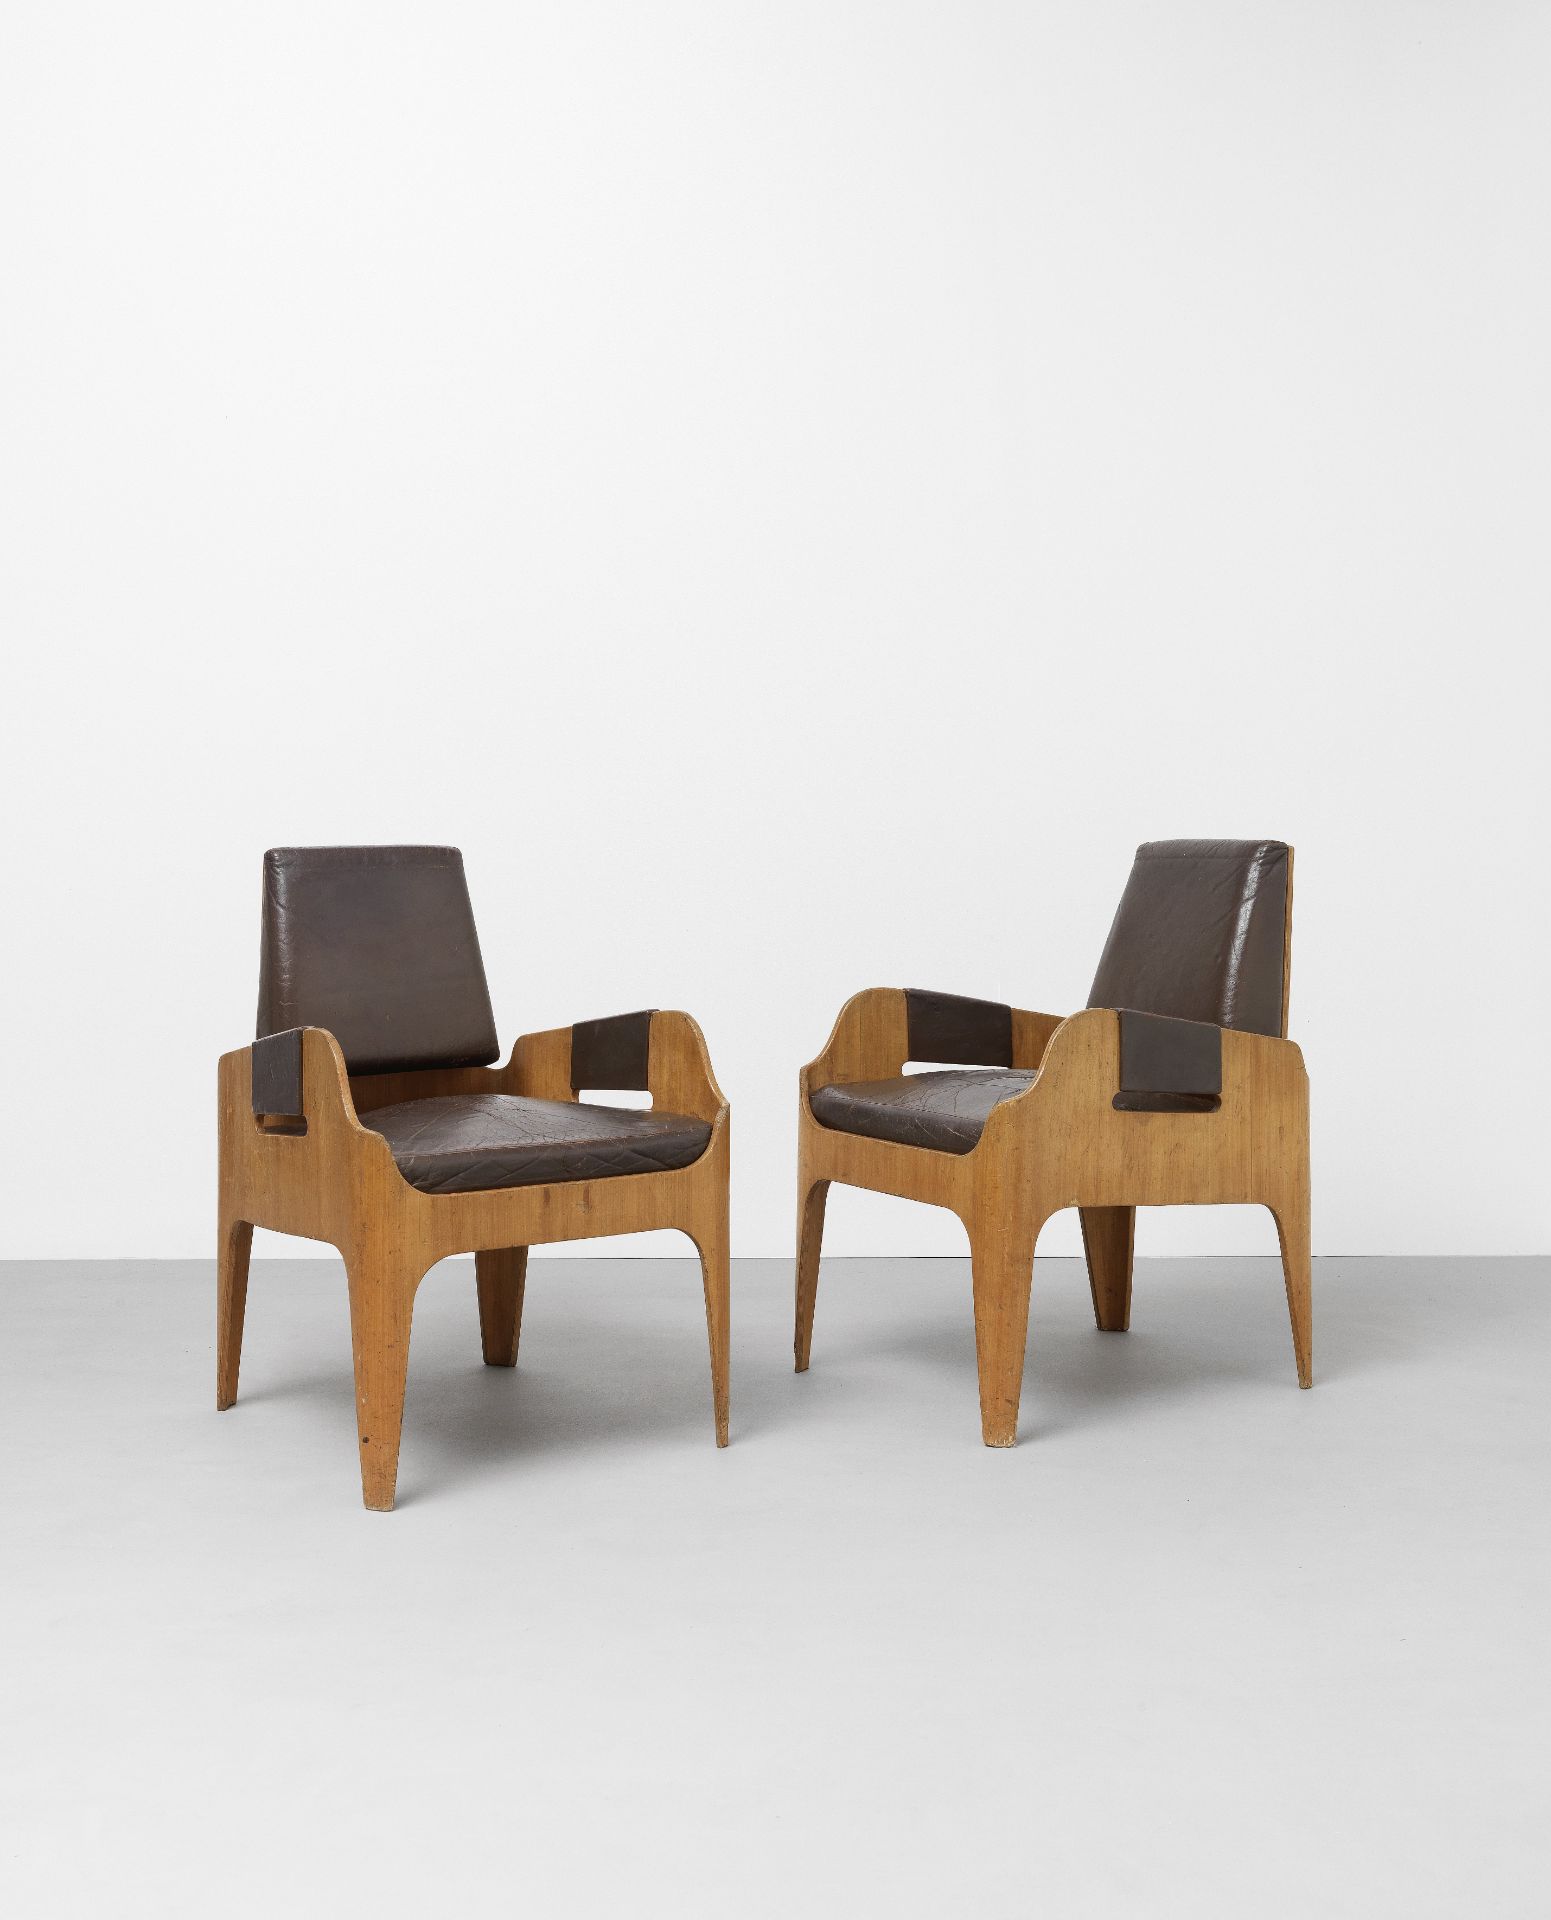 John Wright Pair of armchairs, from the 'SS Canberra' ocean liner, 1960s